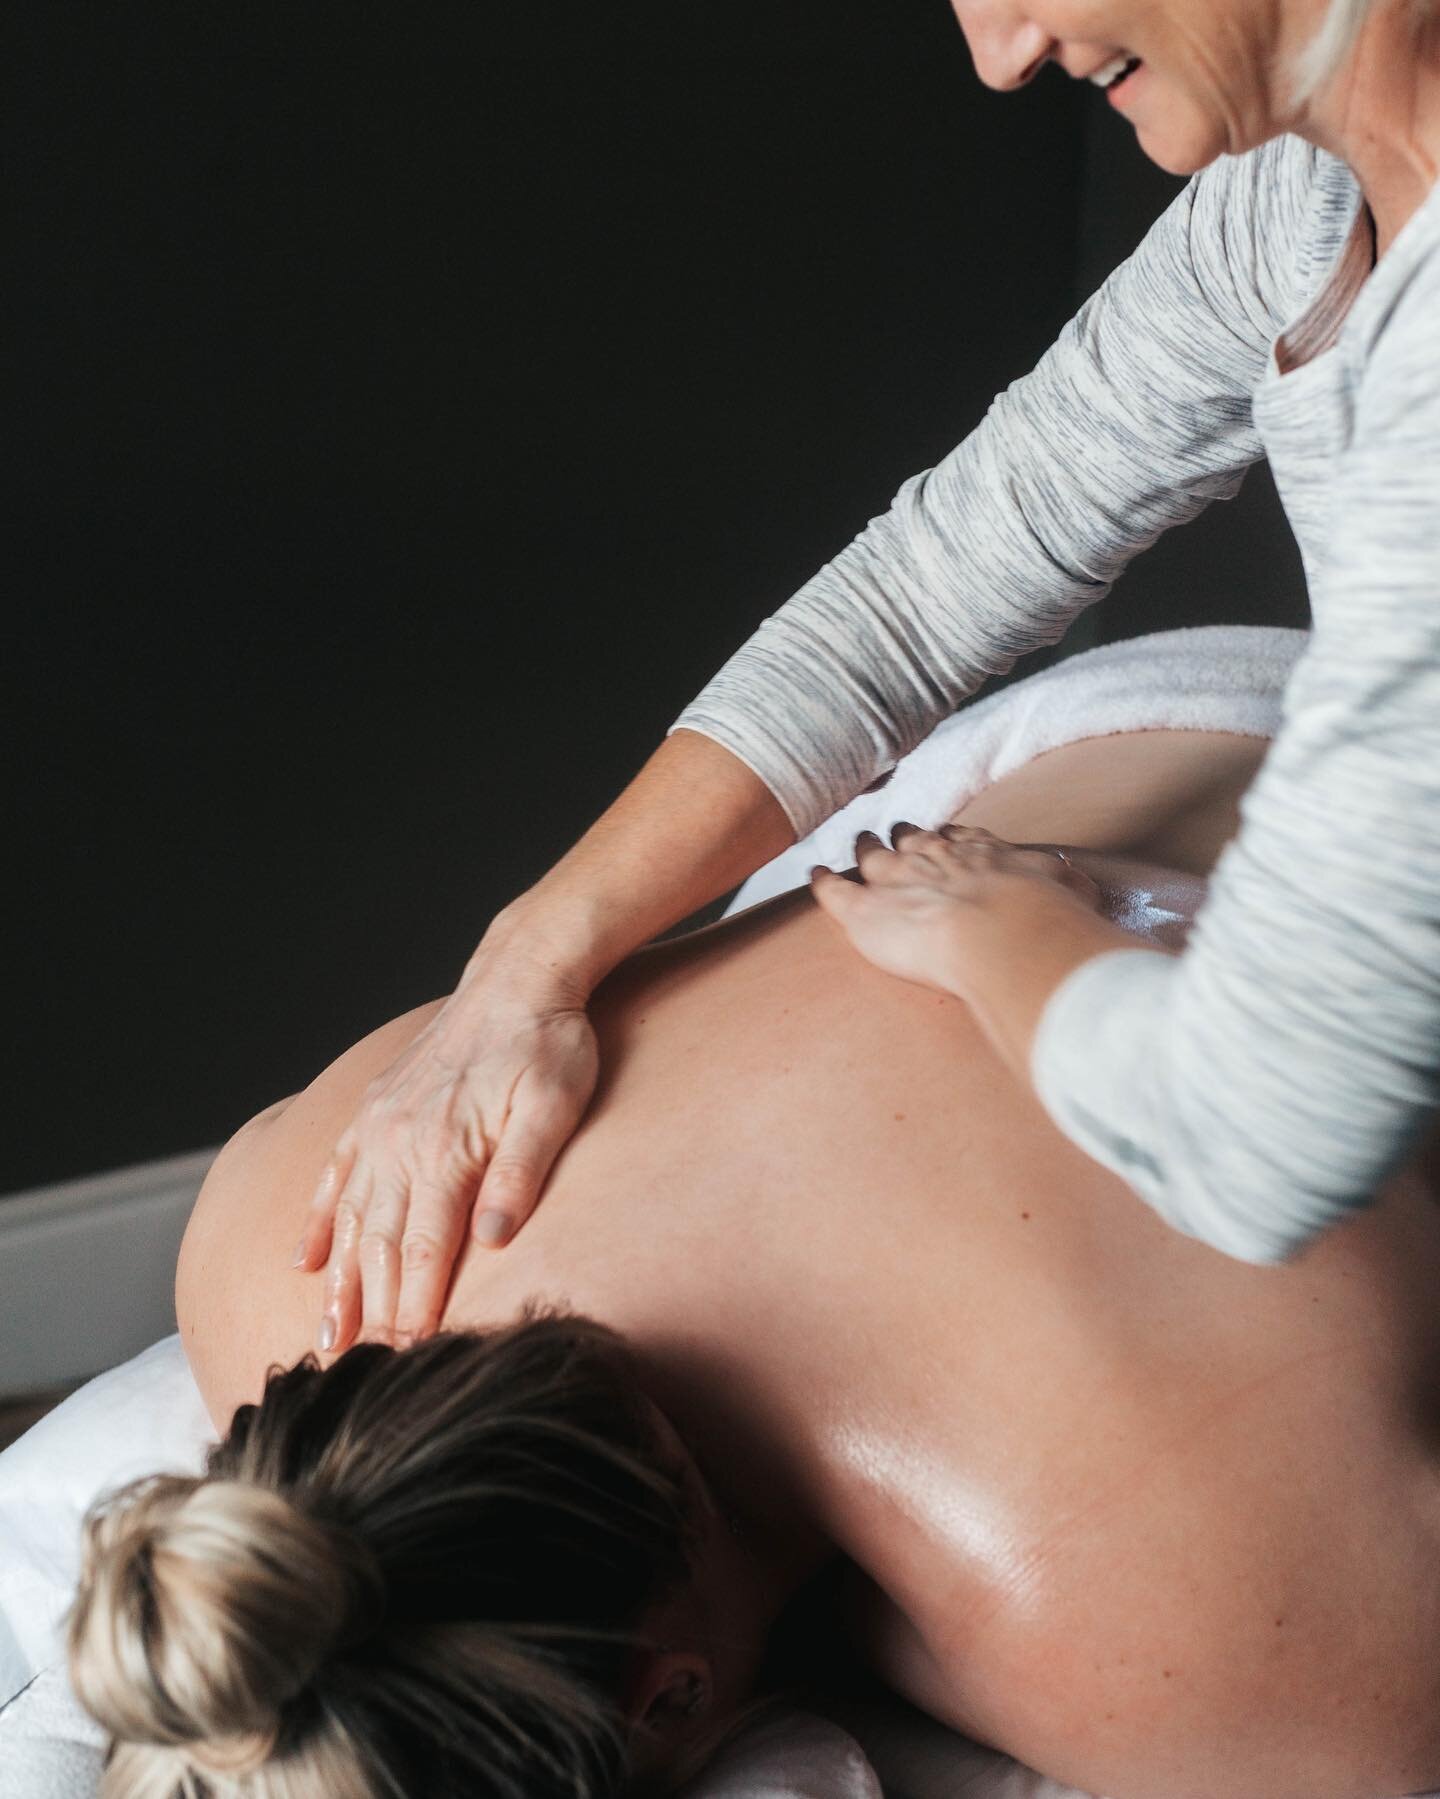 Long weekend goal: RELAXING. 

You know you deserve it 🤍 Book your 30, 45 or 60 minute massage with Teri by tapping the Contact button in our bio! 

#massagetherapist #massagetherapy #spa #selfcare #ldnont #shoplocal519 #nailsalon #longweekend